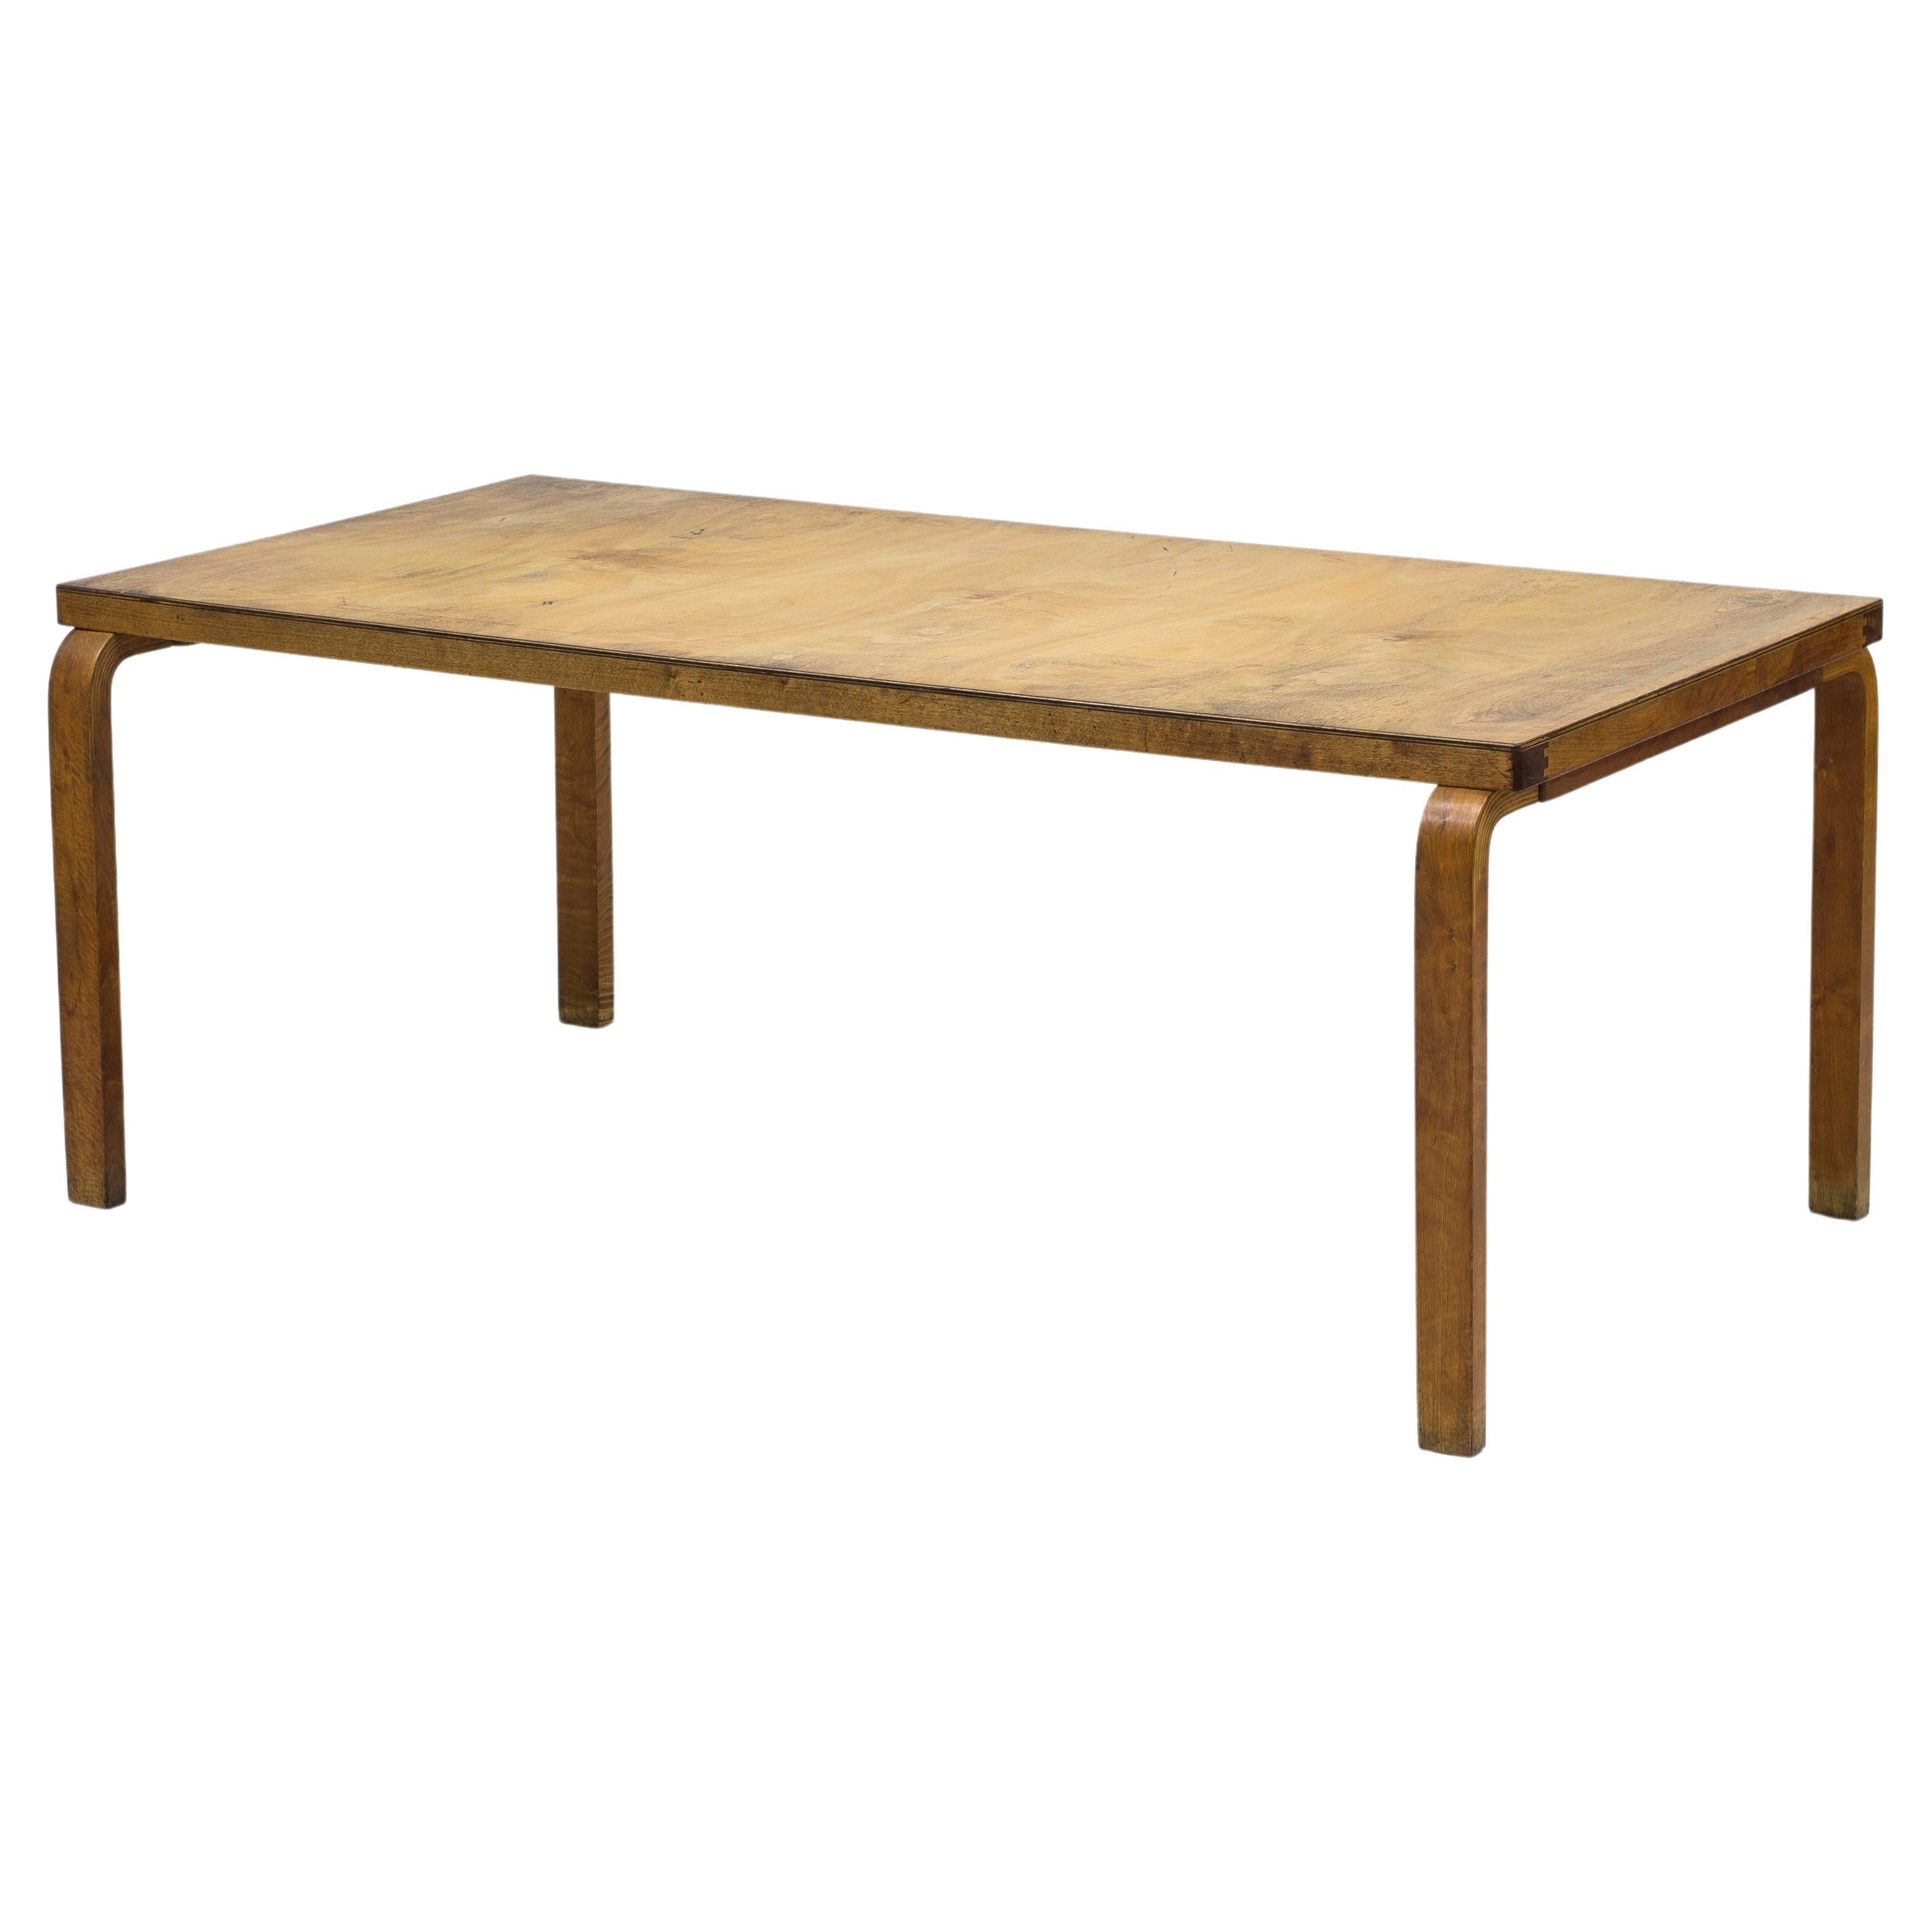 Early model 83 birch dining table by Alvar Aalto, Finland, 1930s For Sale